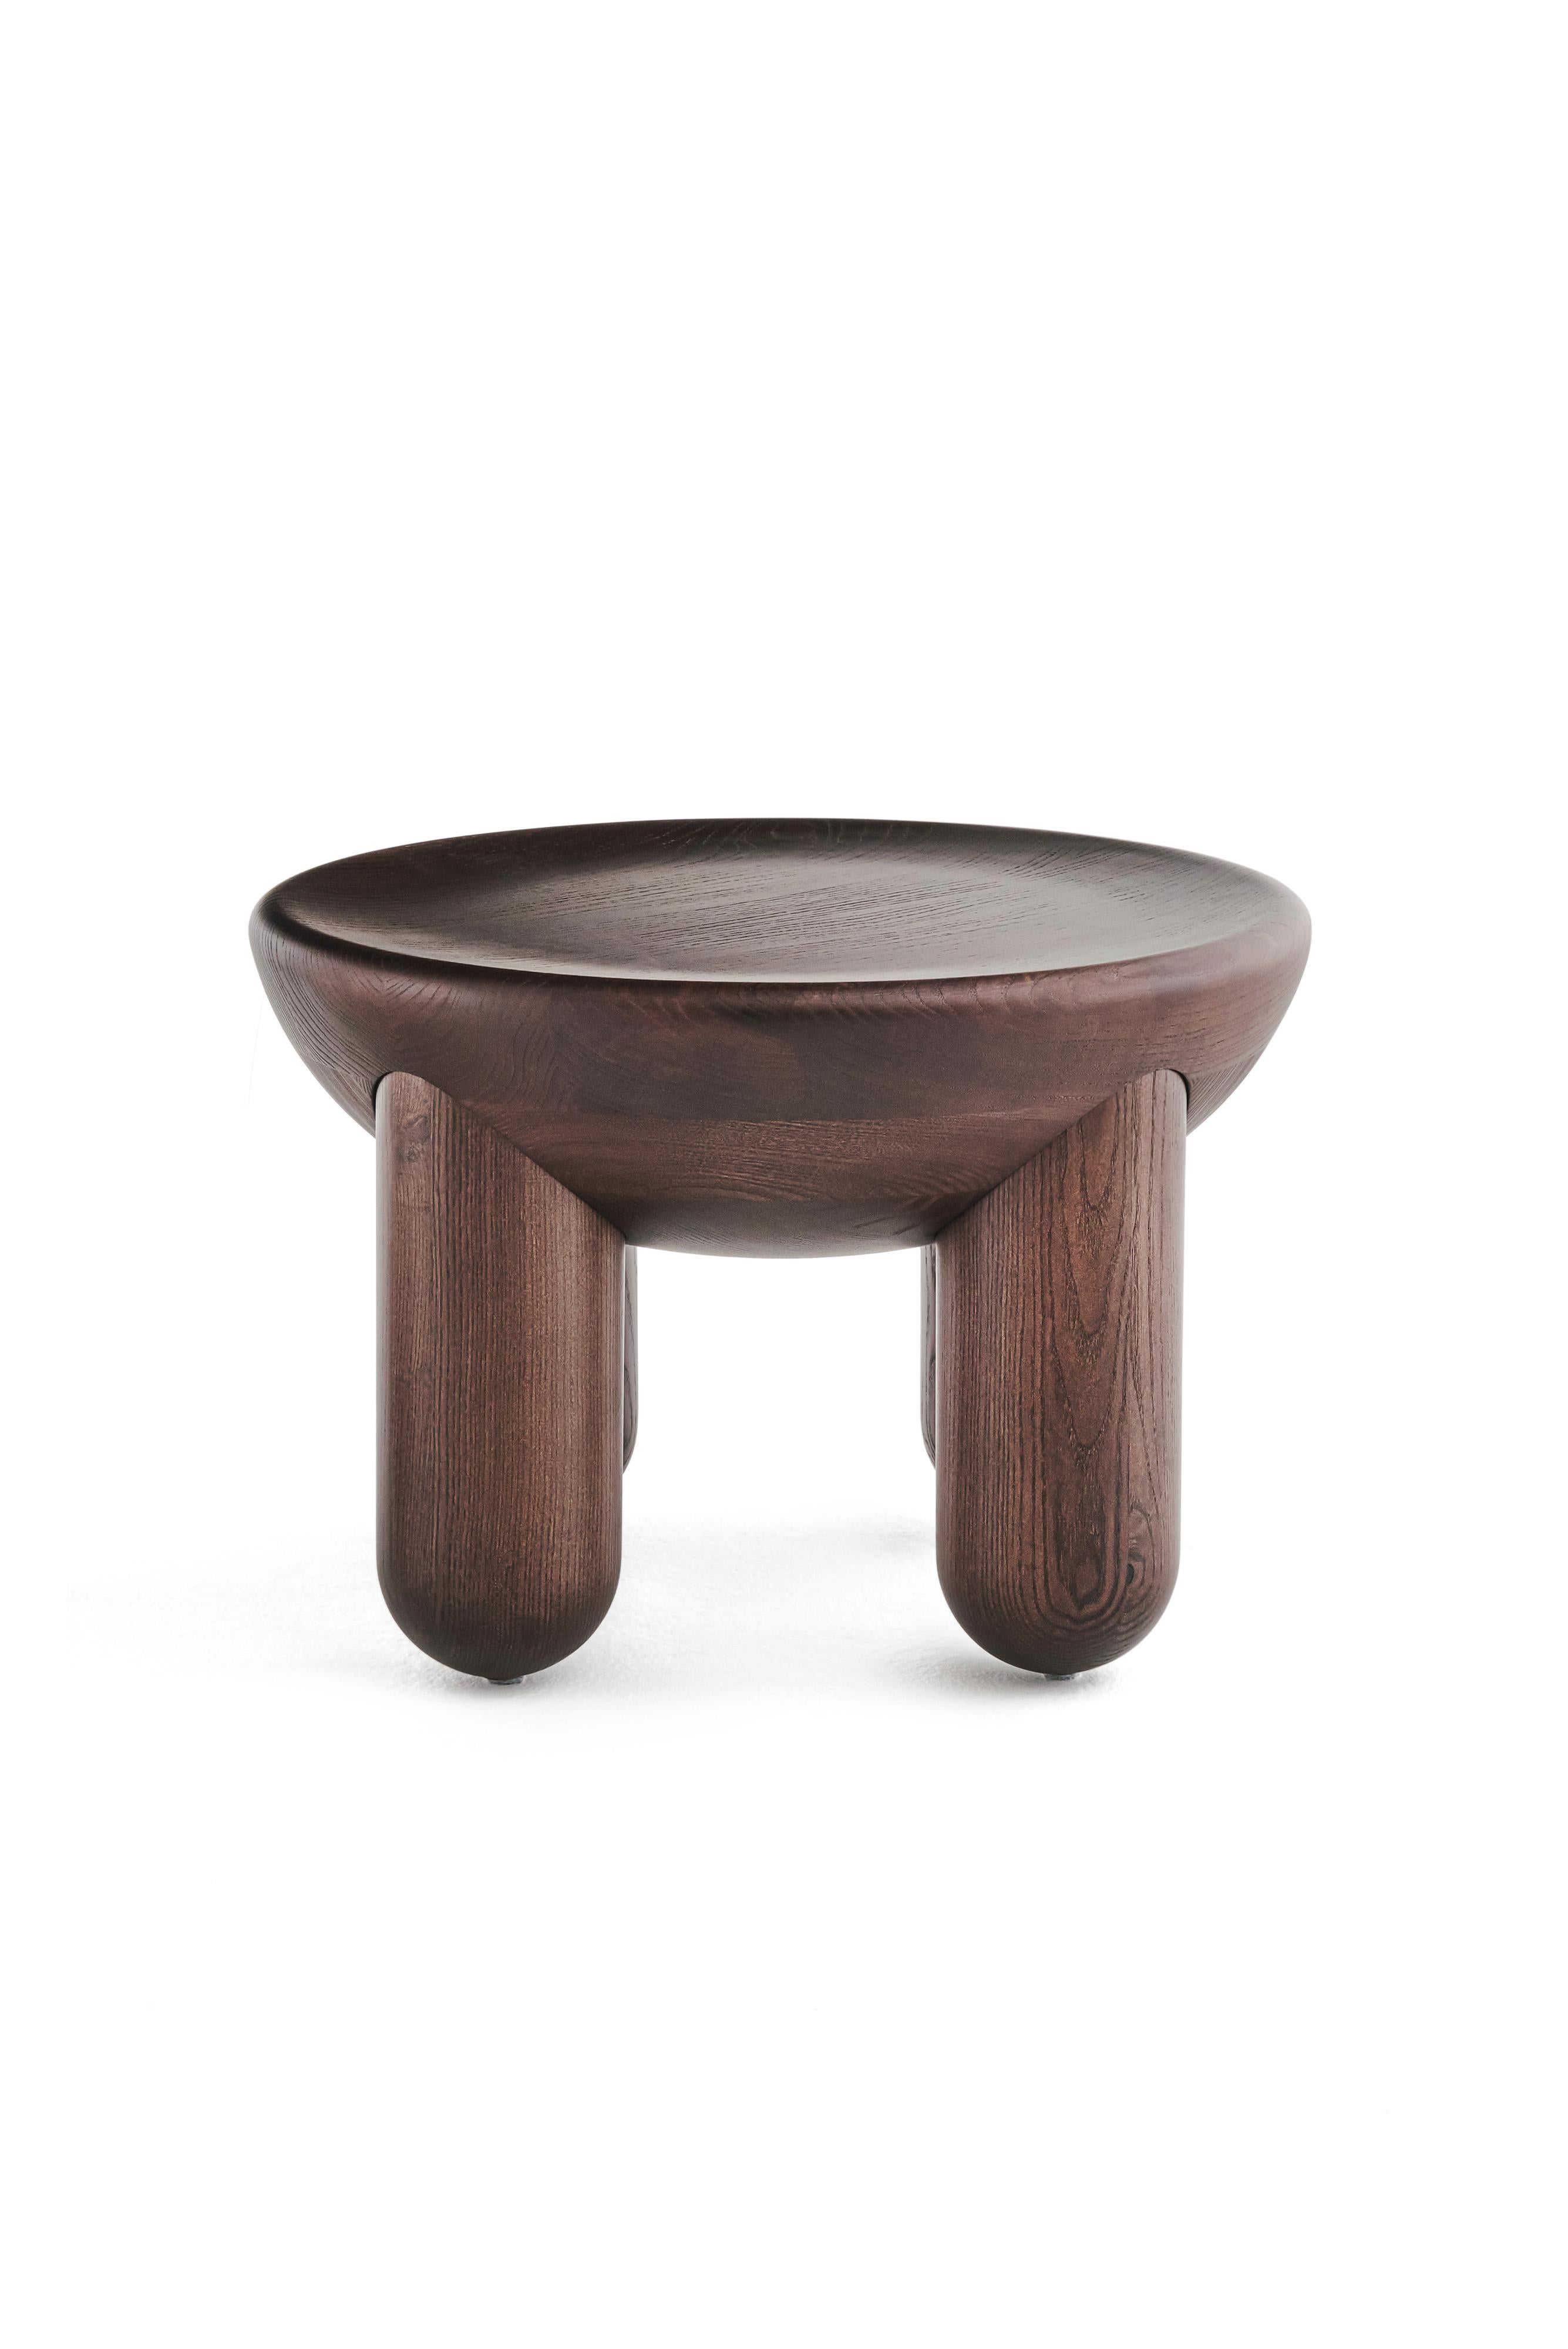 Wooden Coffee Table Freyja 1 in Brown Stained Ash finish by Noom 5